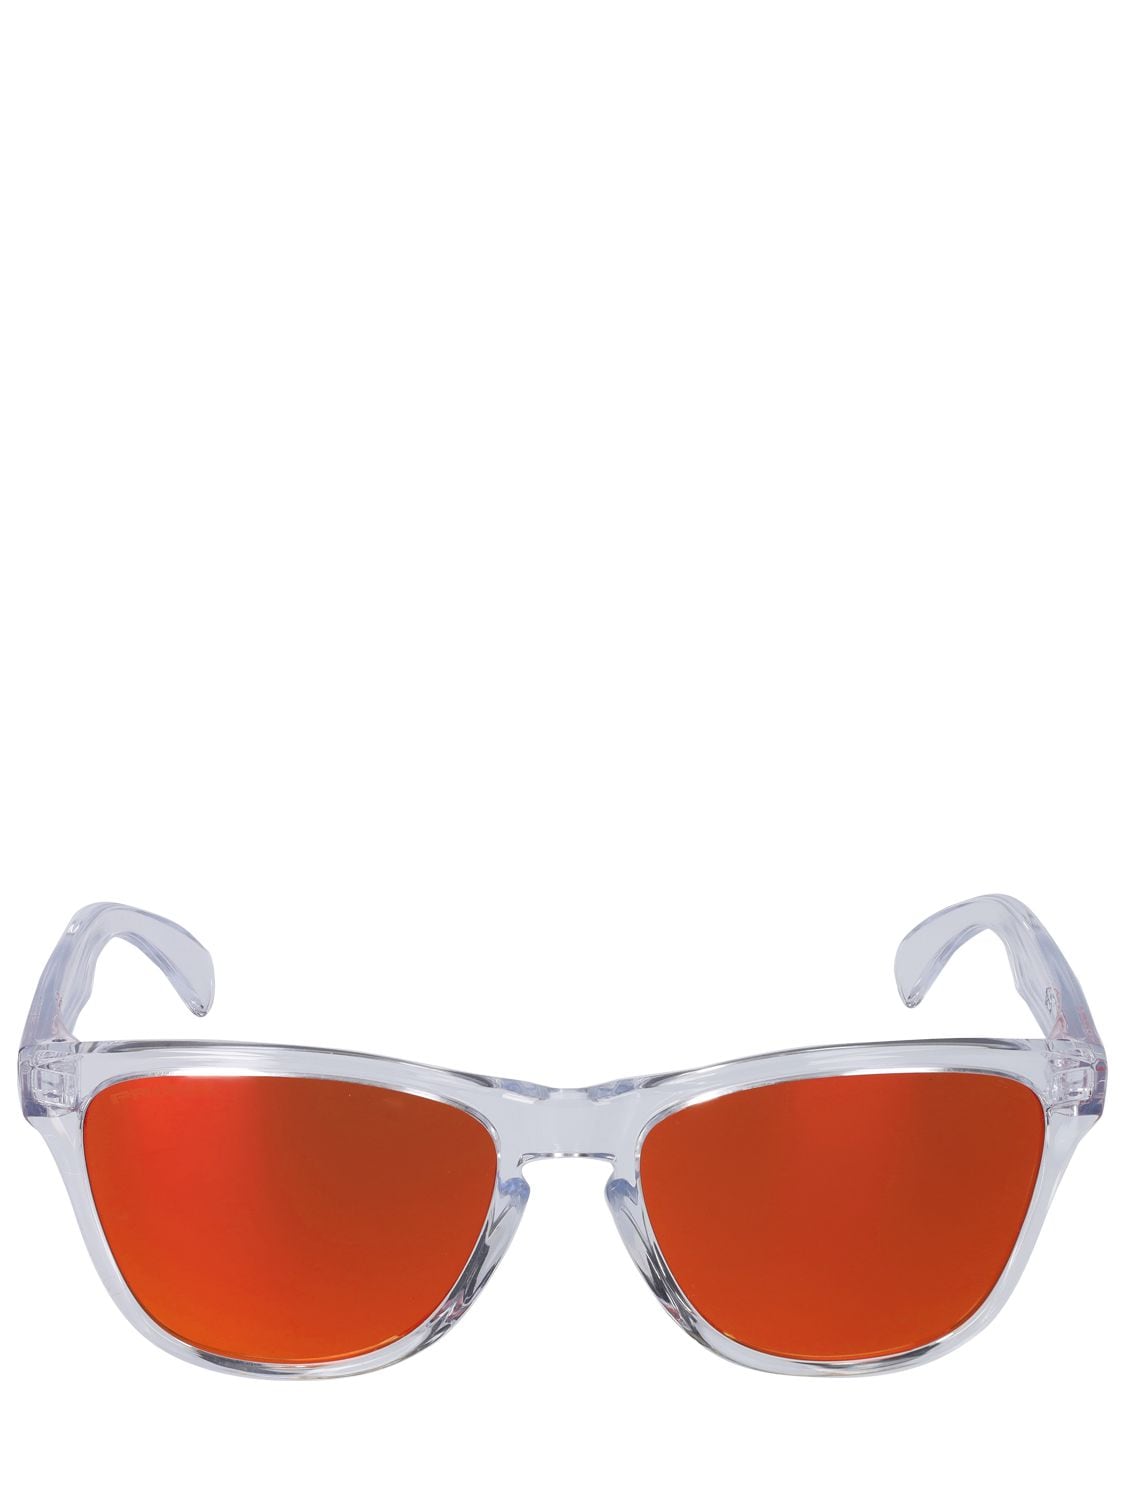 Image of Frogskins Xs Prizm Sunglasses